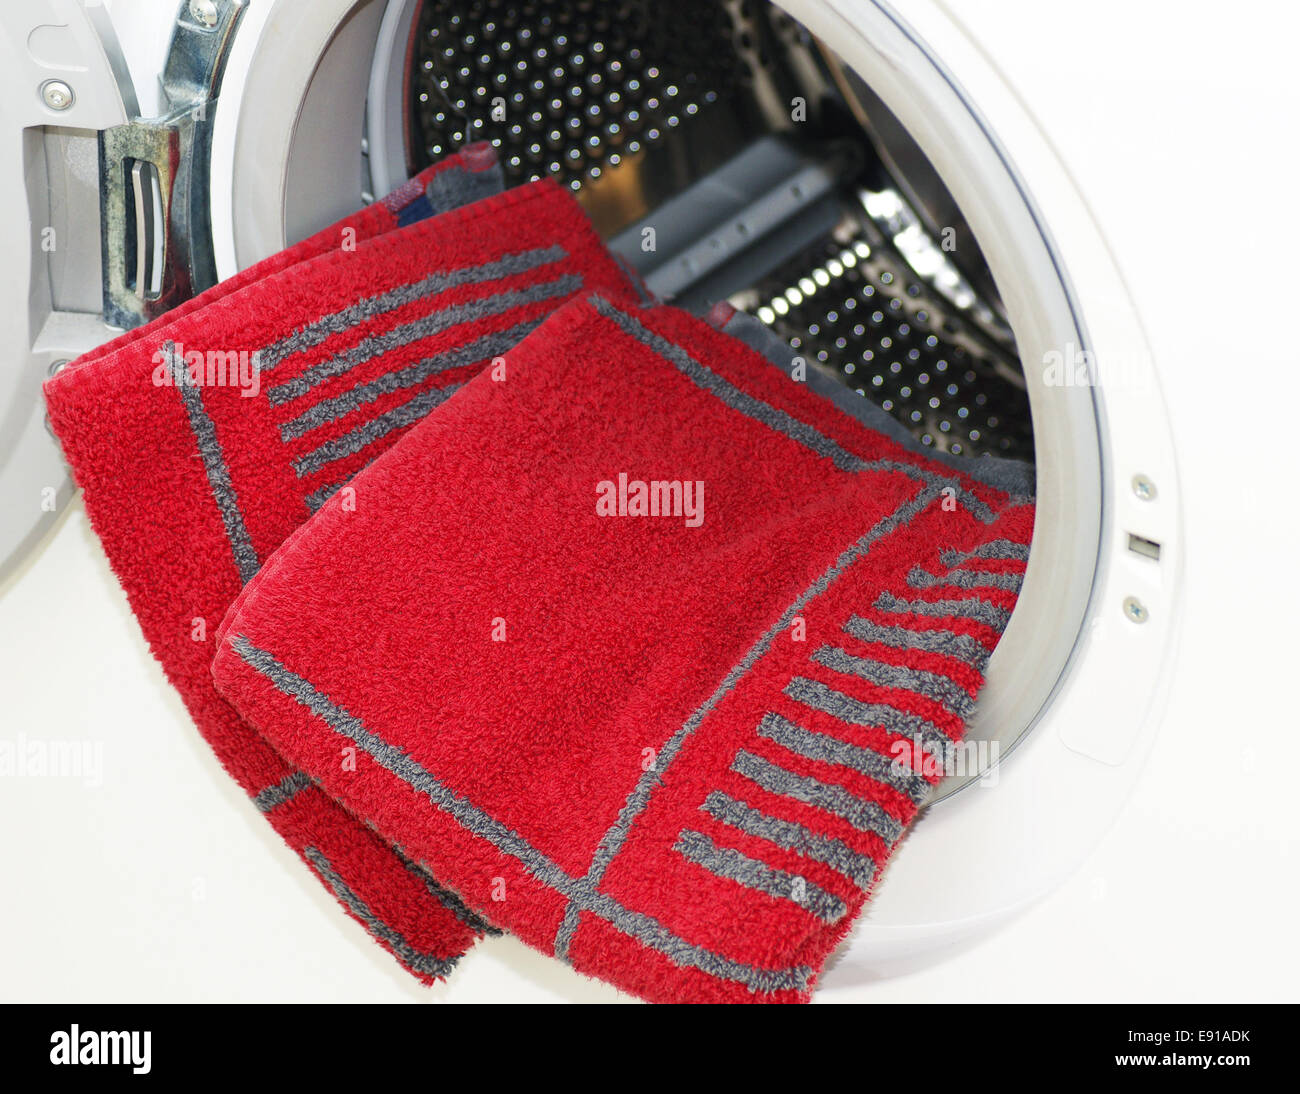 Washing Machine with red Towels Stock Photo